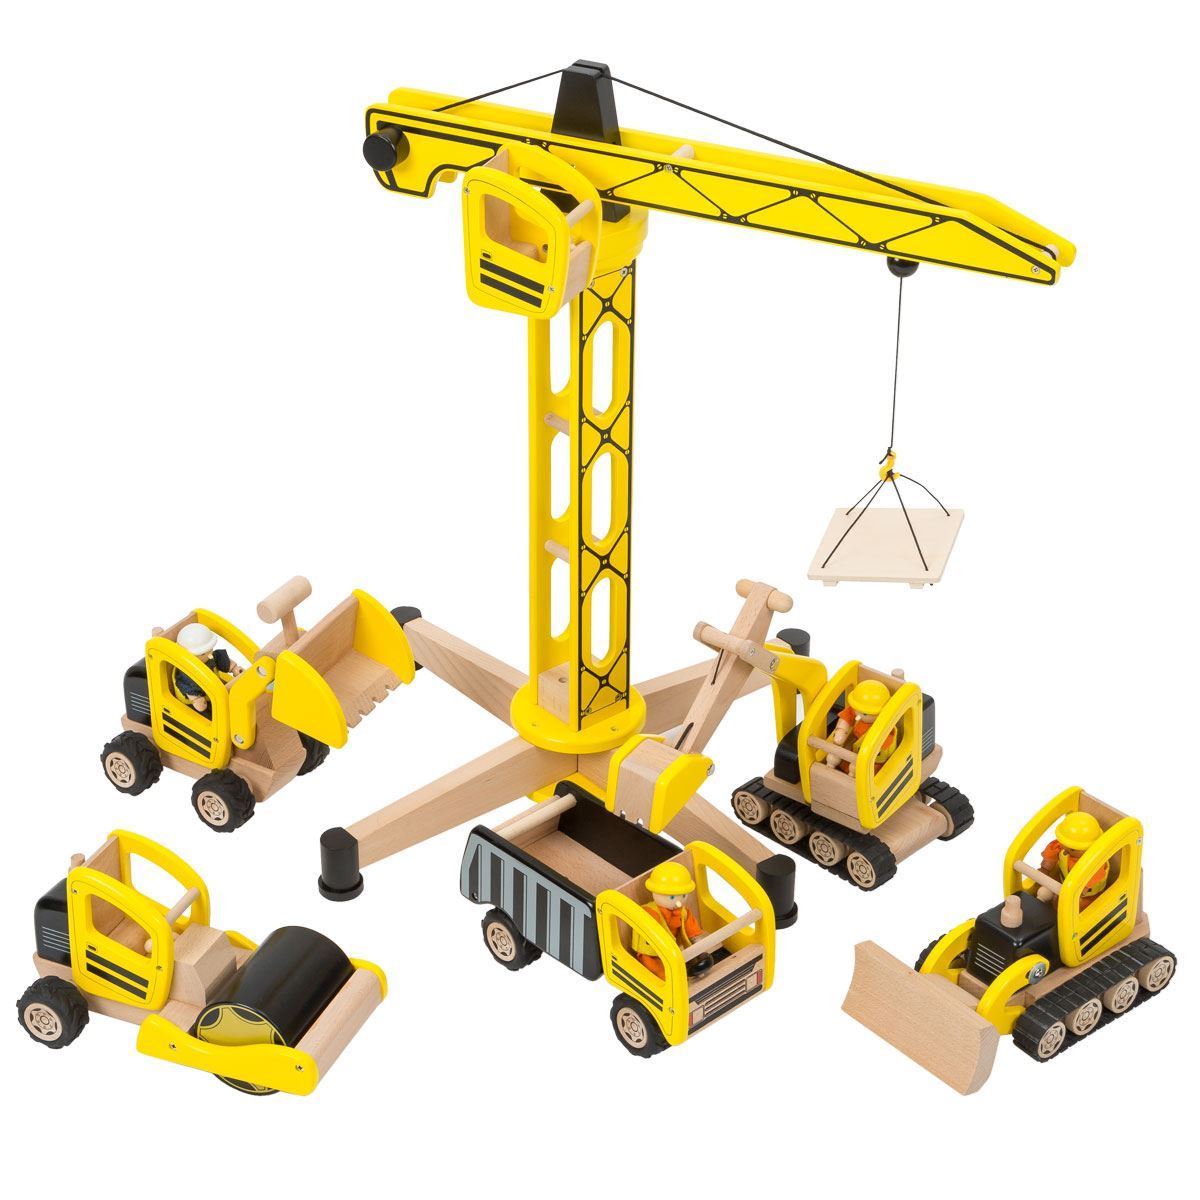 Construction crane wooden toy by ulamarin